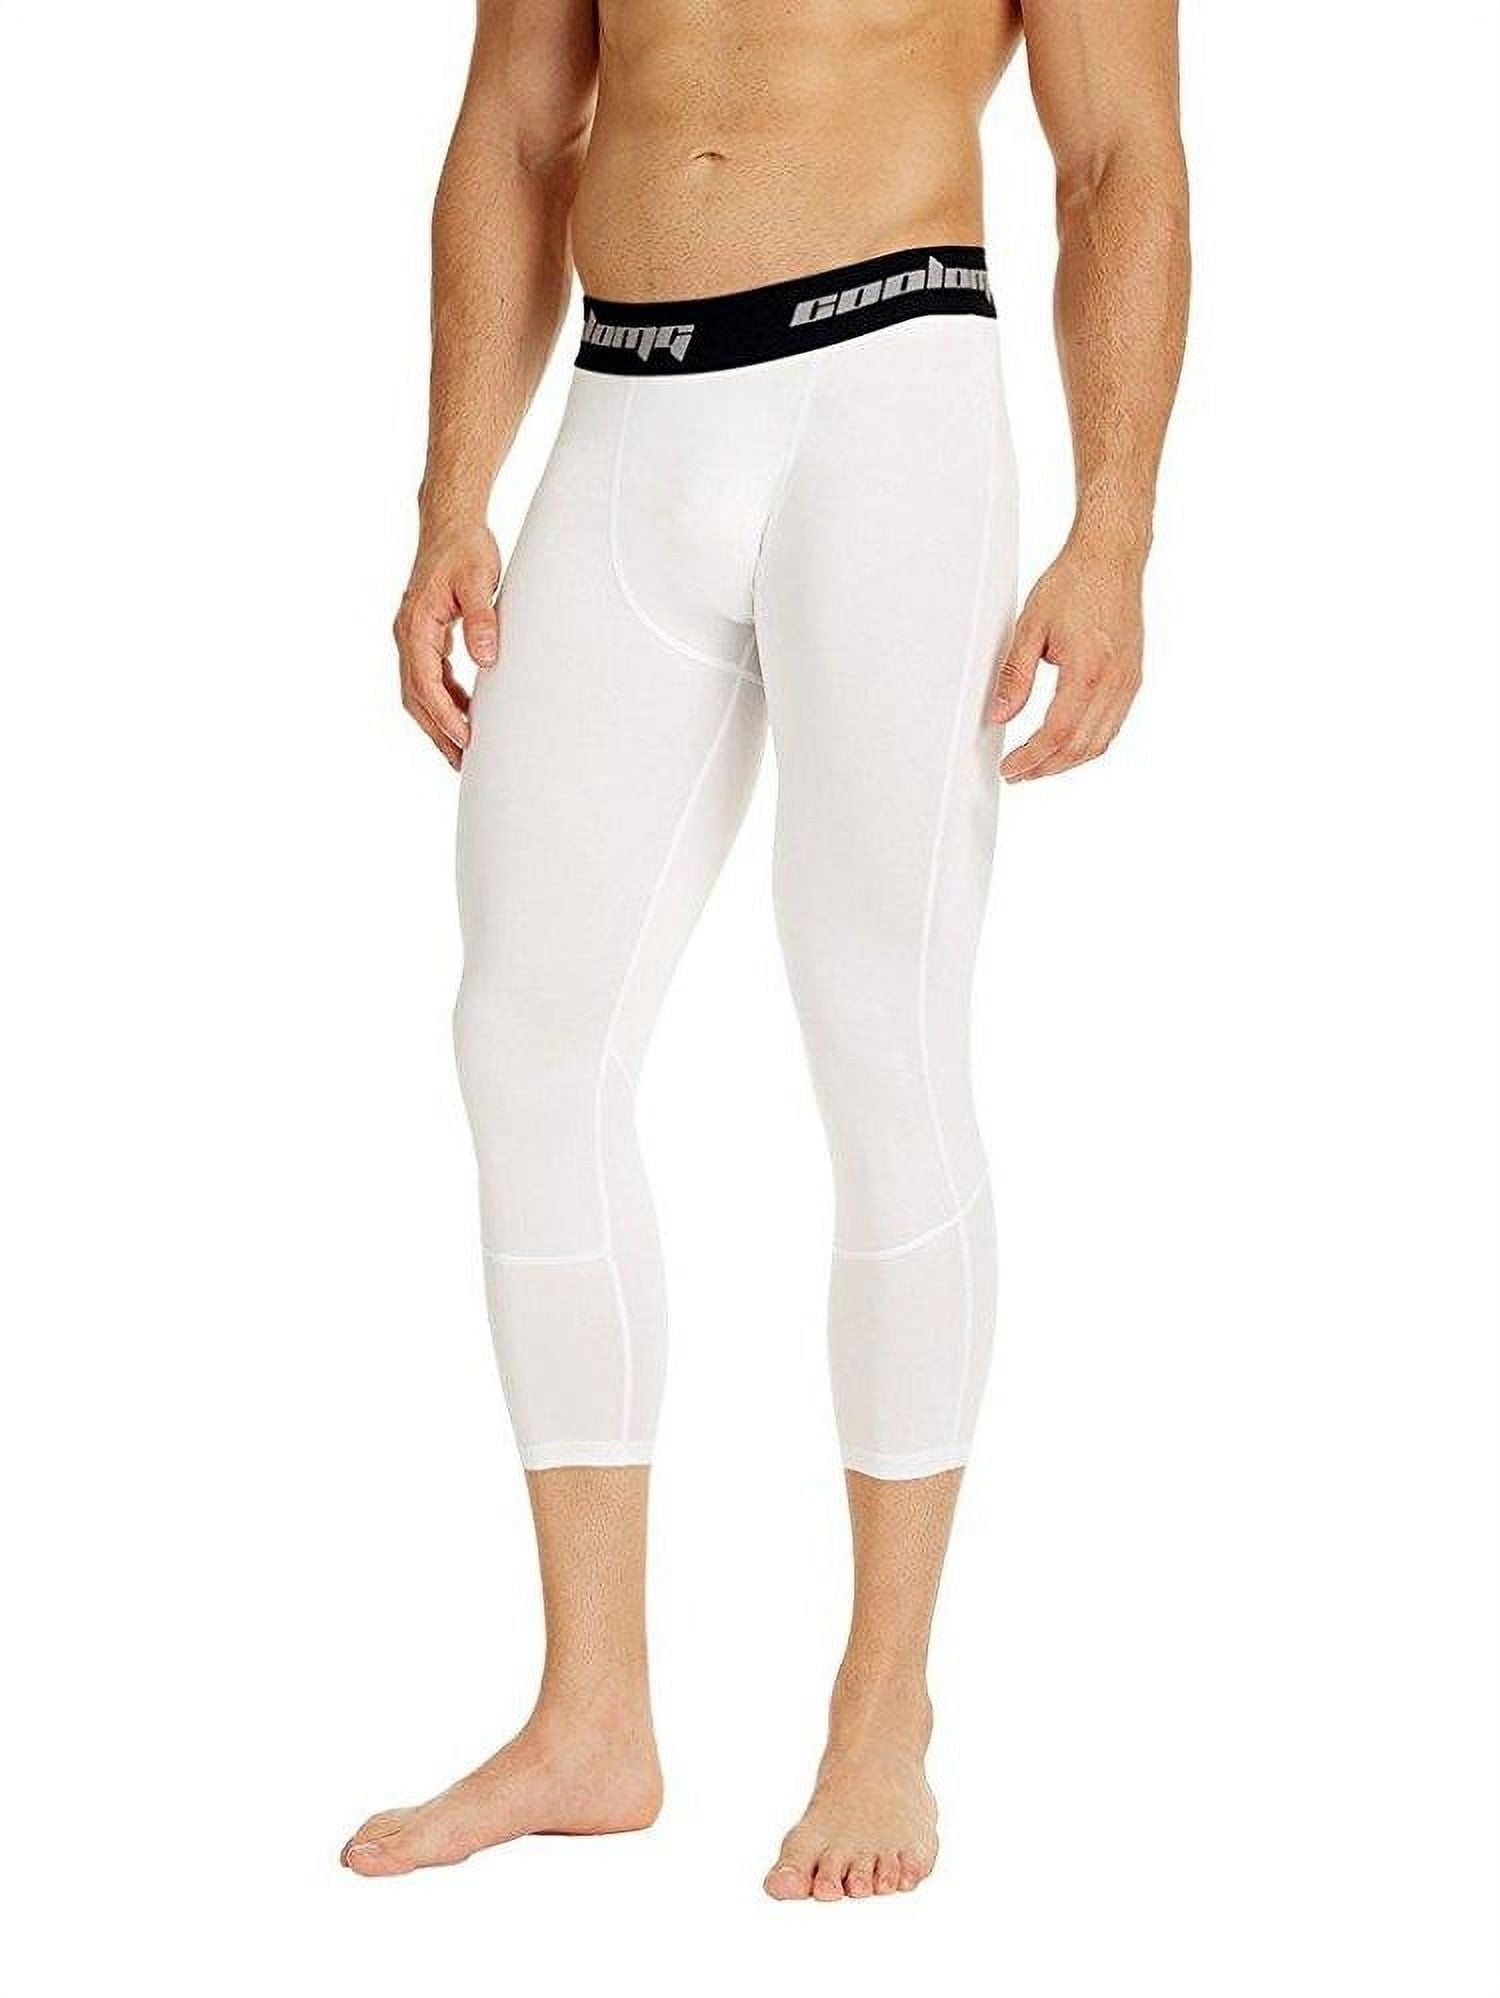 Boys Basketball Compression Pants with Knee Pads 3/4 Capri Padded Sport  Tights Athletic Workout Leggings - Walmart.com